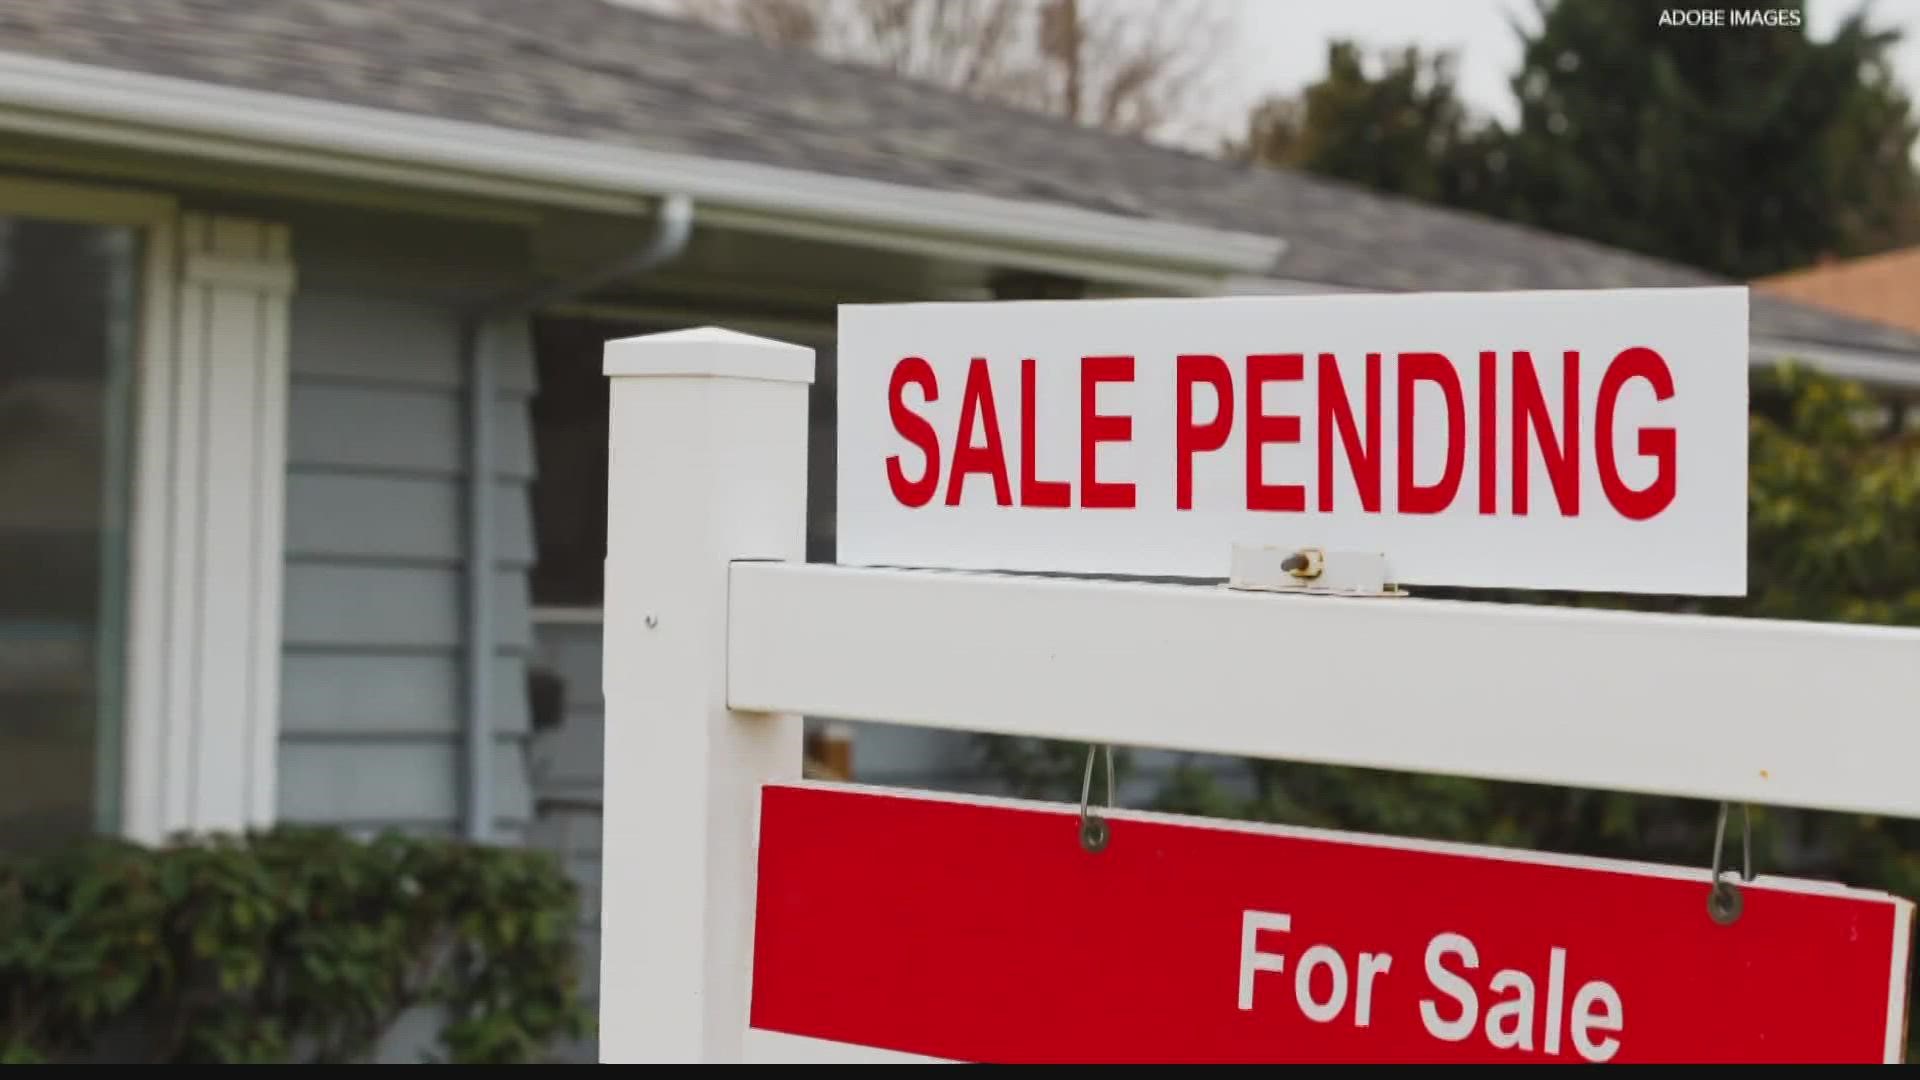 Our 13 Investigates reporter Cierra Putman takes a look at the six companies reportedly buying the most homes.